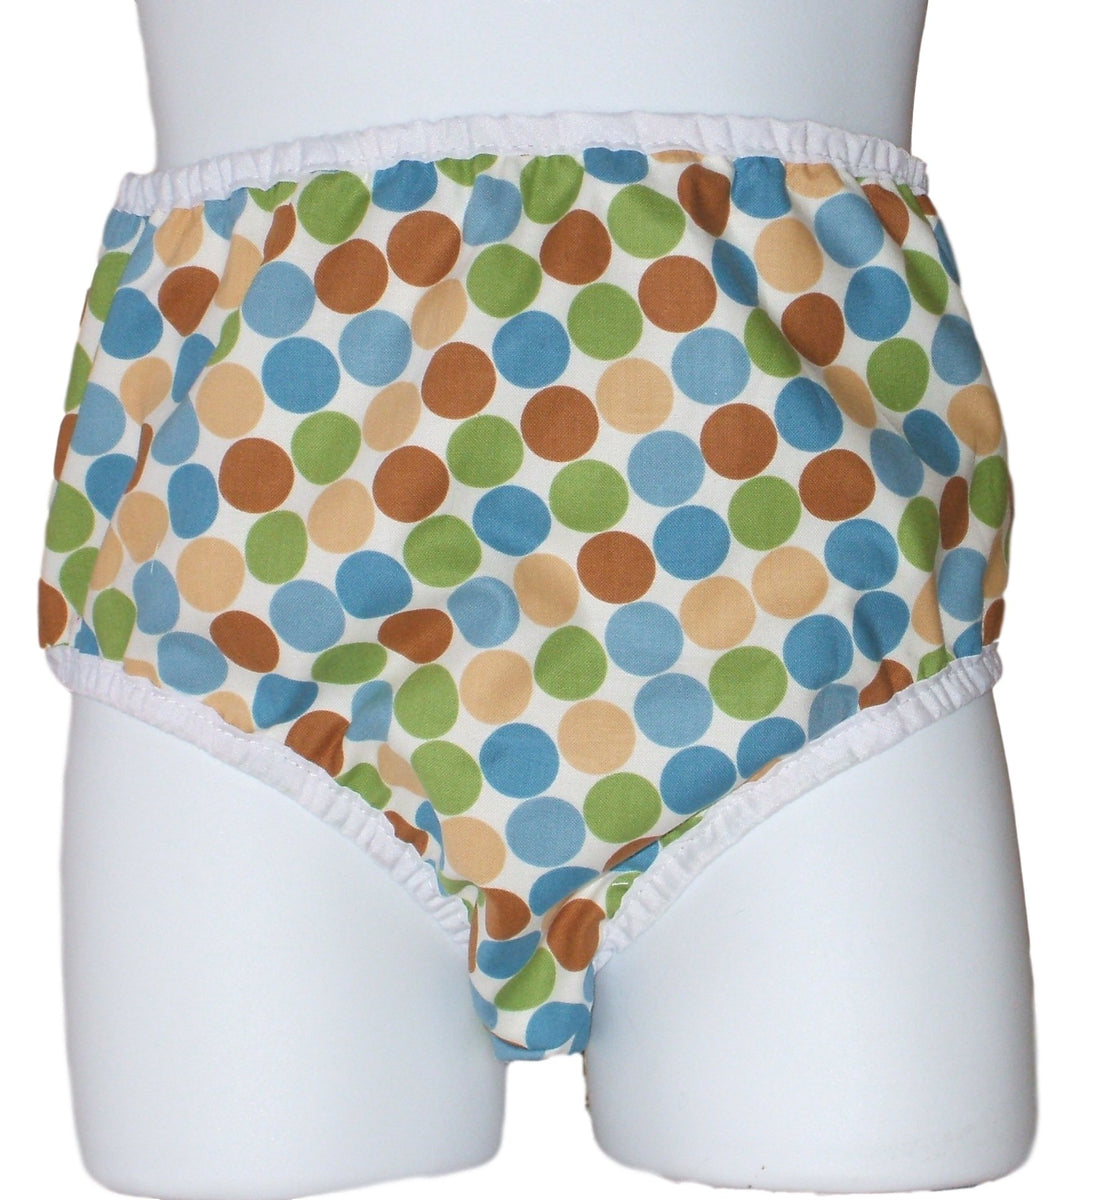 GABBY'S ADULT POOL PANT – My Lil' Miracle